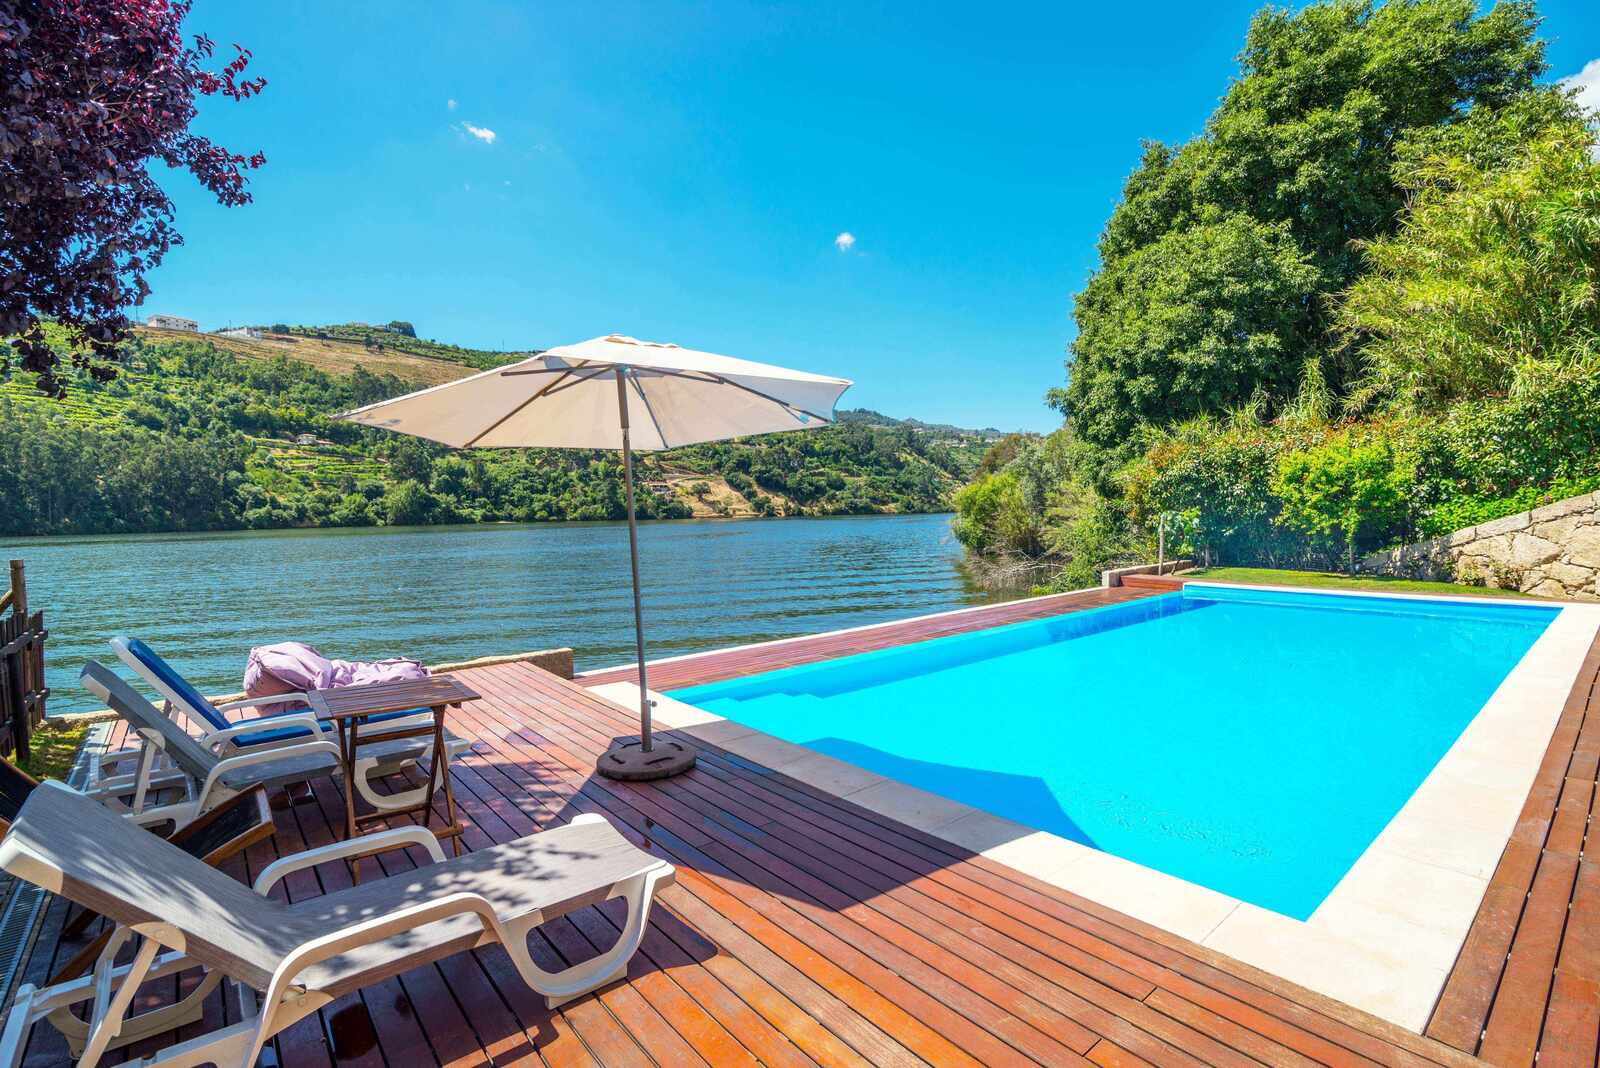 investment, luxury, properties, Douro, Portugal, North, real estate investment